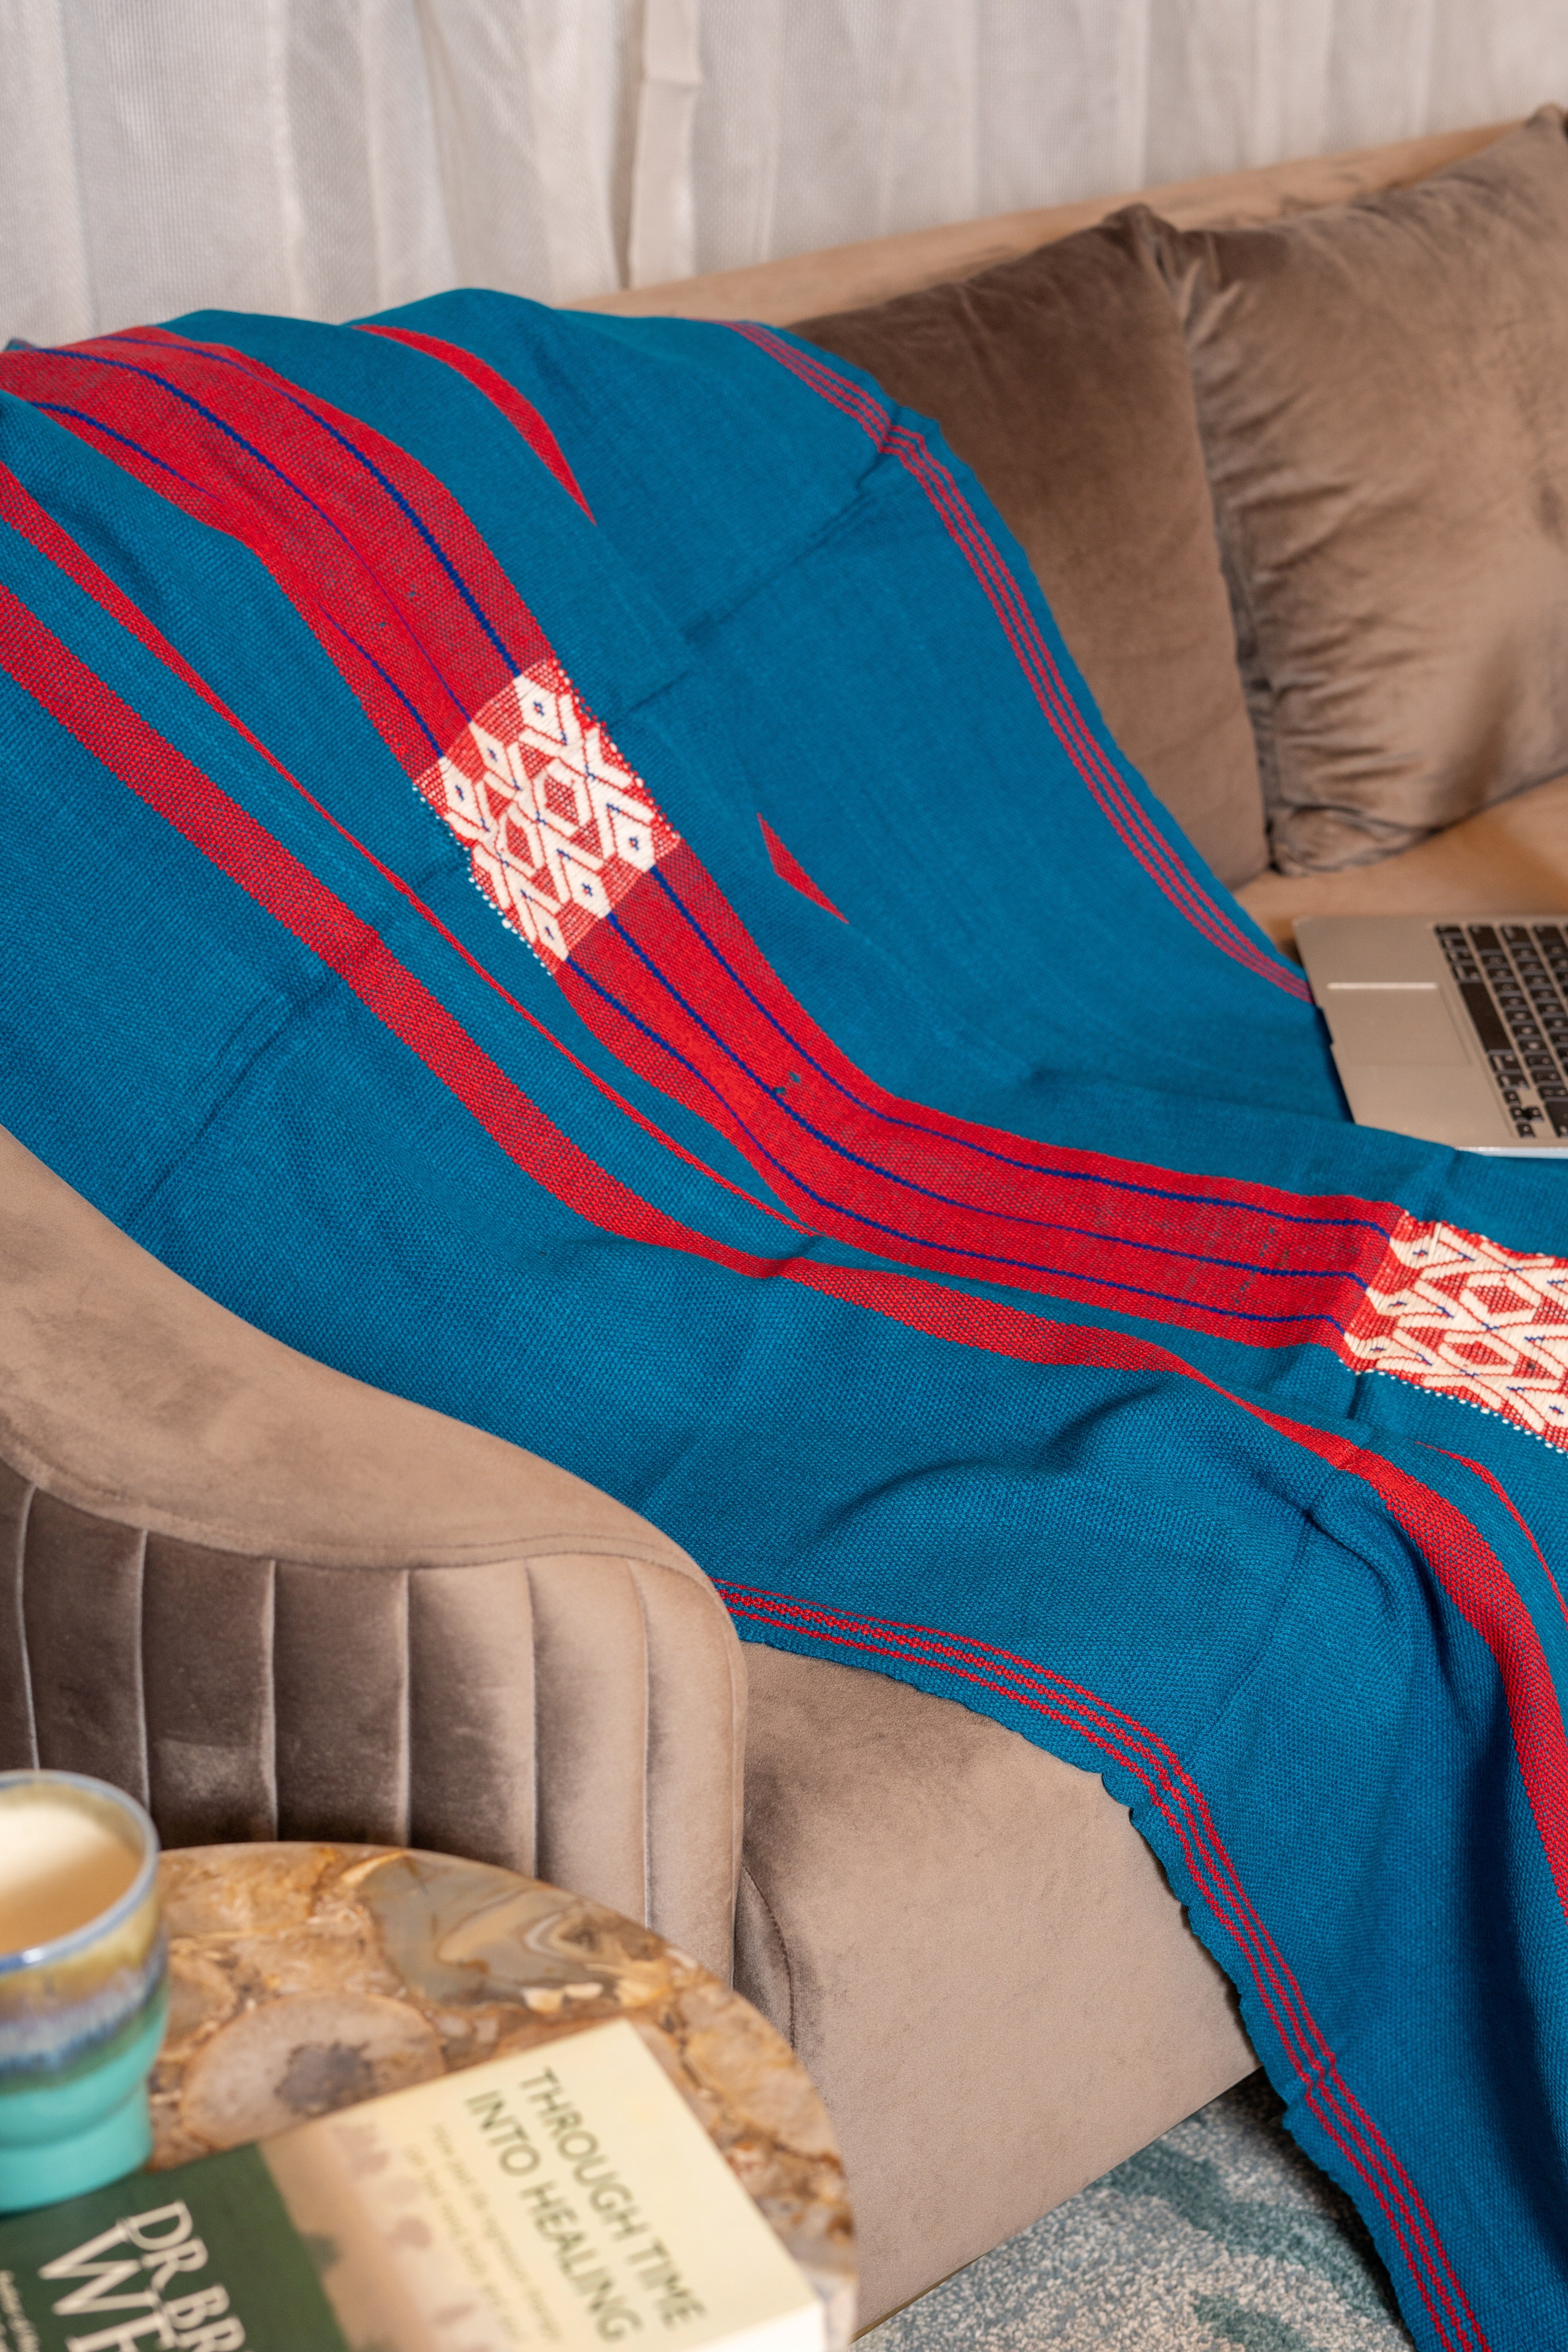 OMVAI Artisanal Patterned Cashmilon Woven Throw Blanket / Comforter - Teal with red white weave e weave